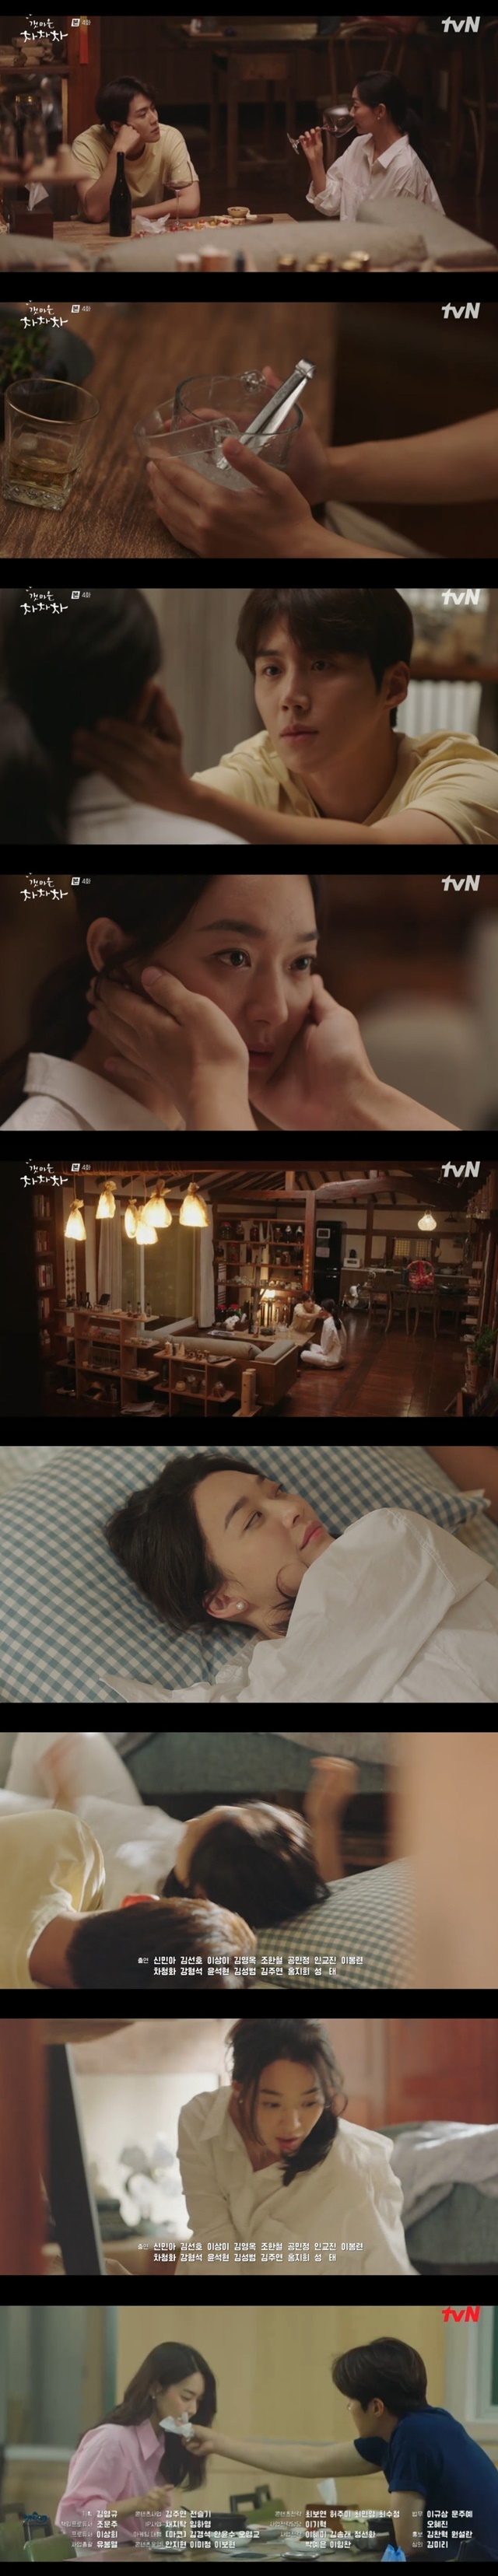 Shin Min-a and Kim Sun-ho drank together and got on the romance rush.Hong Doo-sik (played by Kim Sun-ho) touched the face of Yoon Hye-jin (played by Shin Min-a) in the 4th episode of TVNs Saturday Drama Gang Village Cha Cha Cha Cha Cha (played by Shin Ha-eun/directed Yoo Jae-won) broadcast on September 5.Hong Doo-sik rushed to the news that a molester appeared in the dentistry of Yoon Hye-jin, but caught a molester, and even submitted an indecent camera on the cell phone of the molester picked up by Kim Gam-ri (Kim Young-ok) as evidence to help arrest him.Yoon Hye-jin presented Hong Doo-sik with a wine he loved as a thank-you gesture and did not know what to do.Yoon Hye-jin said at Hong Doo-siks house, Why do you like your house so much?I thought it would smell like a widower, but why are there so many books and LPs? I admired the pictures taken by Hong Doo-sik and his grandfather.I died in middle school, my parents died when I was six years old, and I live alone, Hong said.Hongdusik prepared a snack, and Yoon Hye-jin drank wine and asked, But if you live here alone, is not it lonely? Hongdusik said, I have never thought about it.Everyone here is like a family, and when Yoon Hye-jin asked, Have you ever left? He said, There is. Hong Doo-sik said, There are so many questions, and Yoon Hye-jin allowed the question, Mr. Handy, Mr. Hong ask me one question.So Hong Doo-sik said, Why did you come to the resonance? Not to say that you are going to make money in the country.It was my mothers birthday that day when I was in the resonance, said Yoon Hye-jin, when asked, You dont have to answer it if you dont want to.Its sad that my birthday will be gone and the date will be left after a person dies, he confessed, if my mother was alive, it would have been a happy day.I was on a family trip before my mother died, said Yoon Hye-jin, in resonance. Im really crazy. Im drunk. I think my face is hot.When asked, I am a red face? Hong Doo-sik grabbed the ice bucket and grabbed the face of Yoon Hye-jin and said, Its too hot.Hong Doo-sik and Yoon Hye-jin are drinking wine and talking about the inside.After that, through the epilogue scene at the end of the broadcast, Hong Doo-sik was not surfing on a holiday day that he must keep, but he was racing to catch the molester in the worry of Yoon Hye-jin.